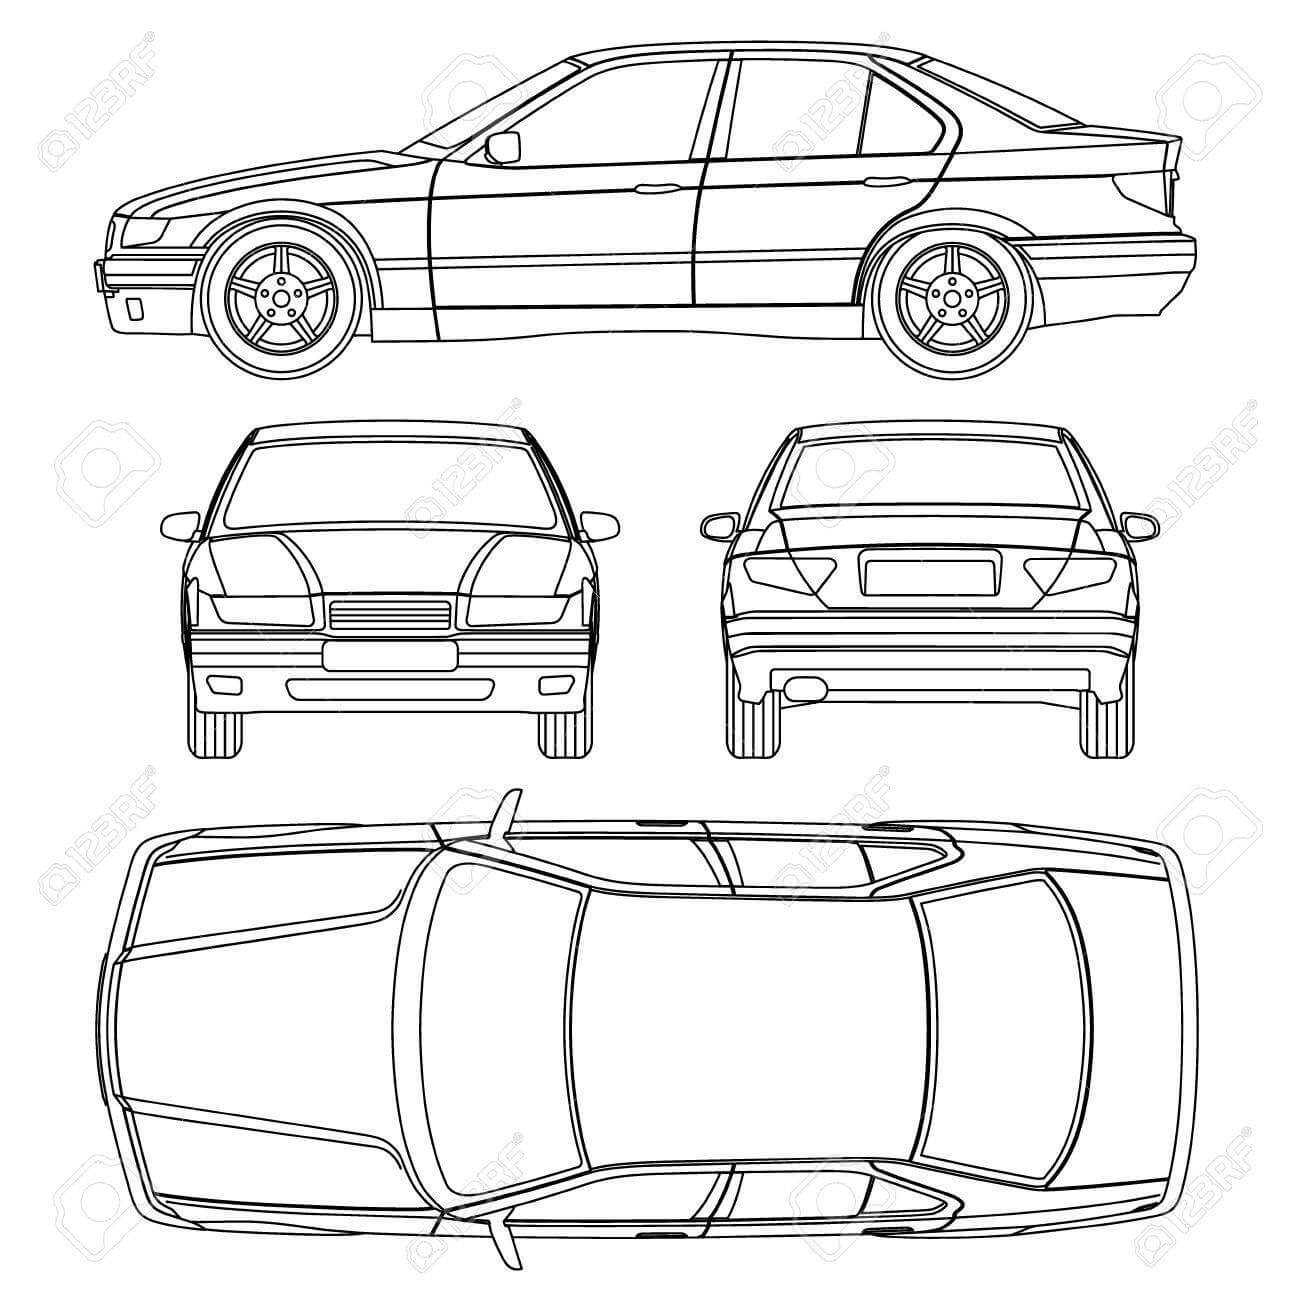 009 Template Ideas Car Line Draw Insurance Damage Condition Within Car Damage Report Template